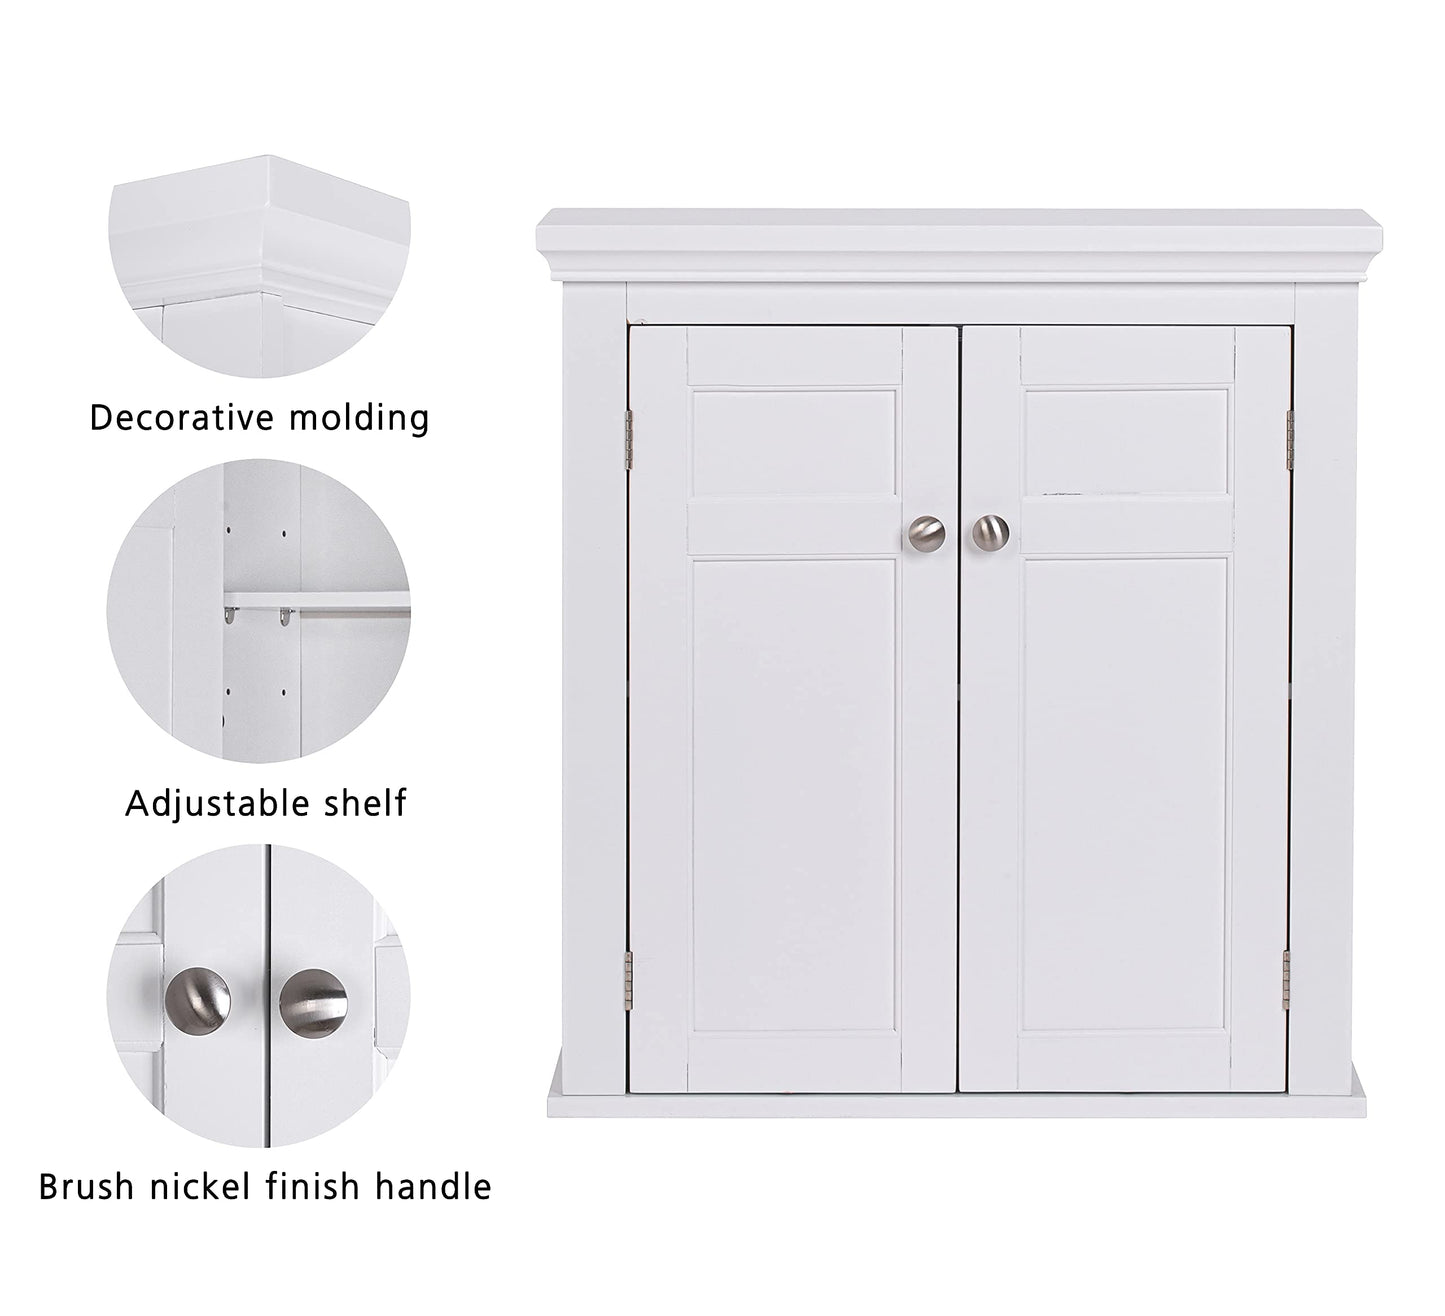 Spirich Bathroom Cabinet Wall Mounted, Hanging Bathroom Storage Cabinet Over Toilet, Medicine Cabinet with Doors and Shelves (White)